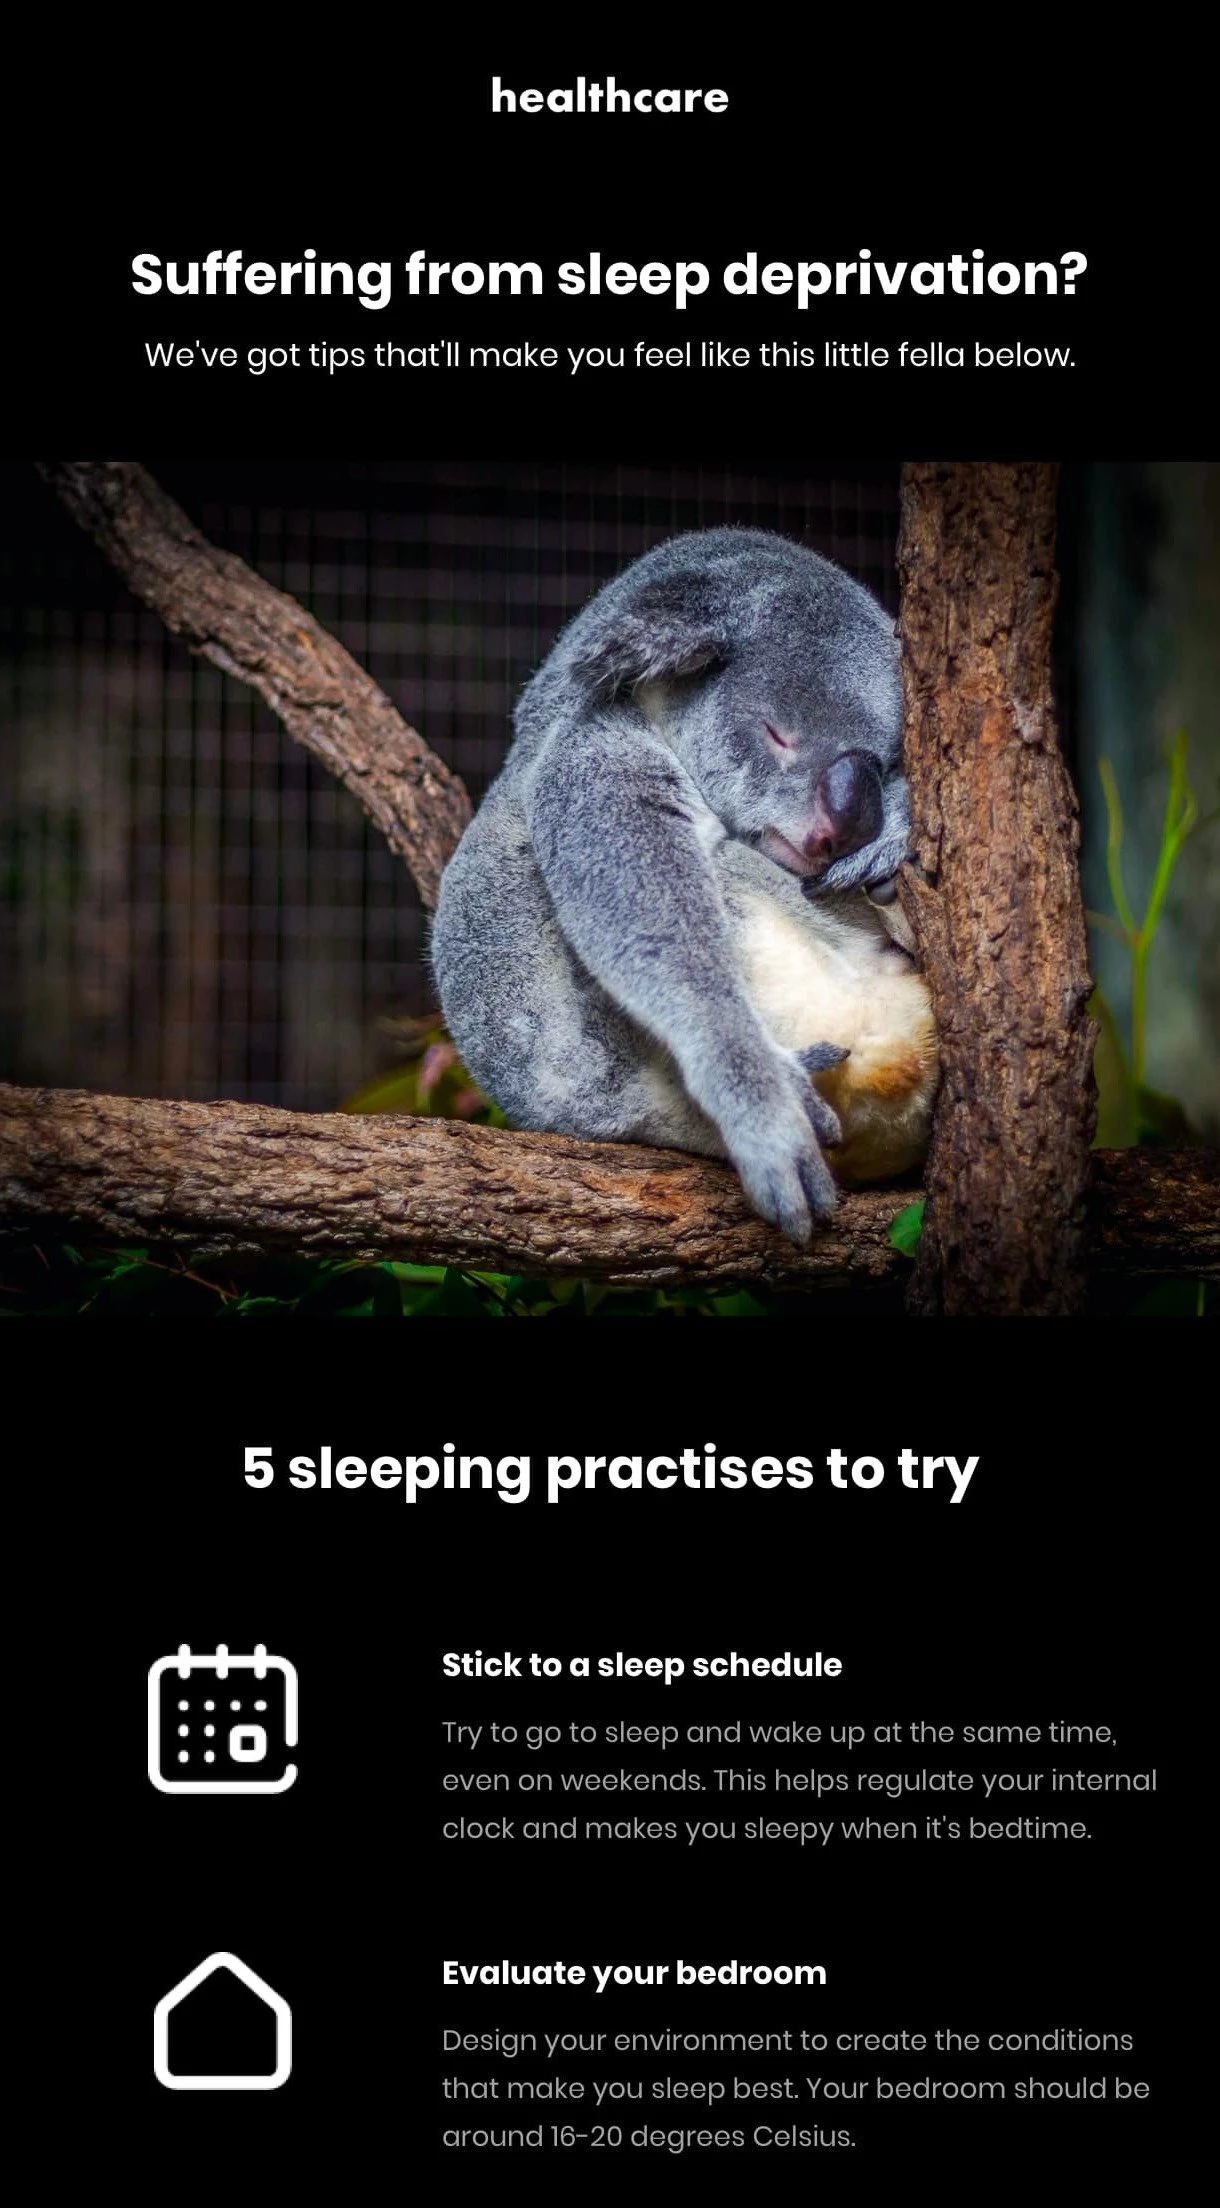 mailerlite black background newsletter email with sleeping koala healthcare sequence